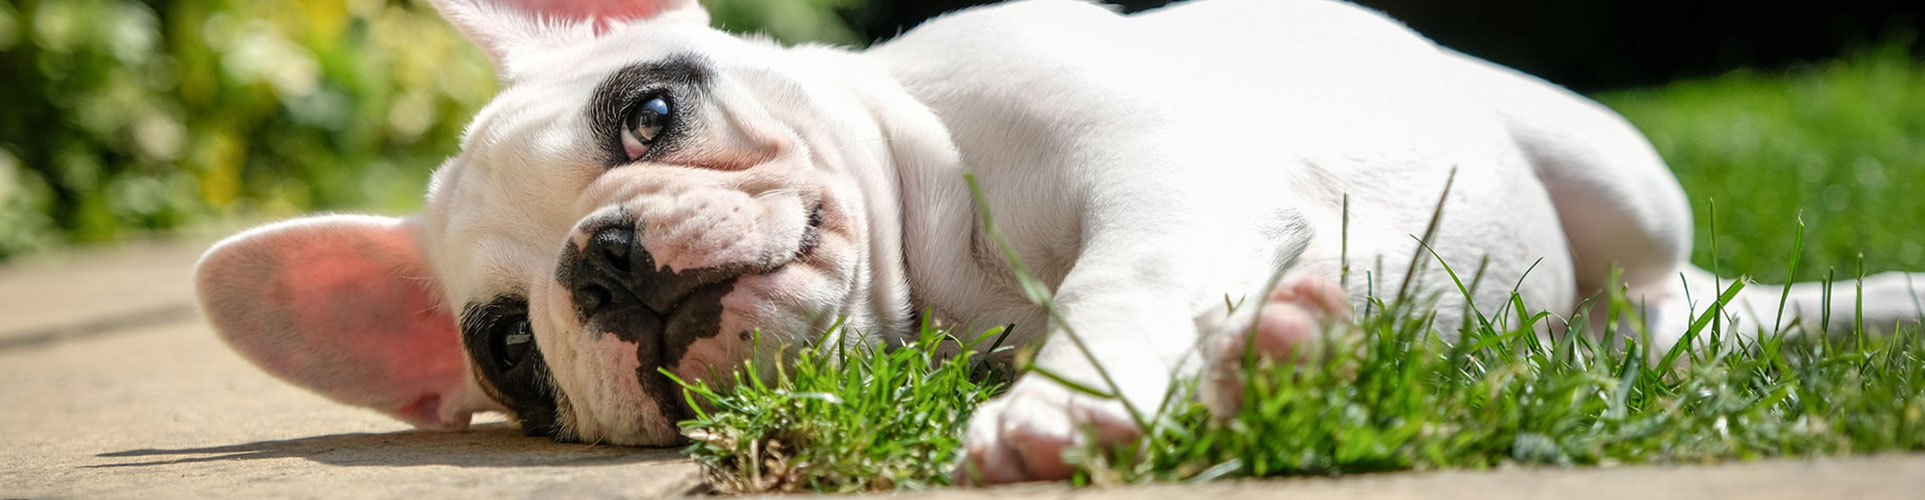 puppy-laying-in-grass